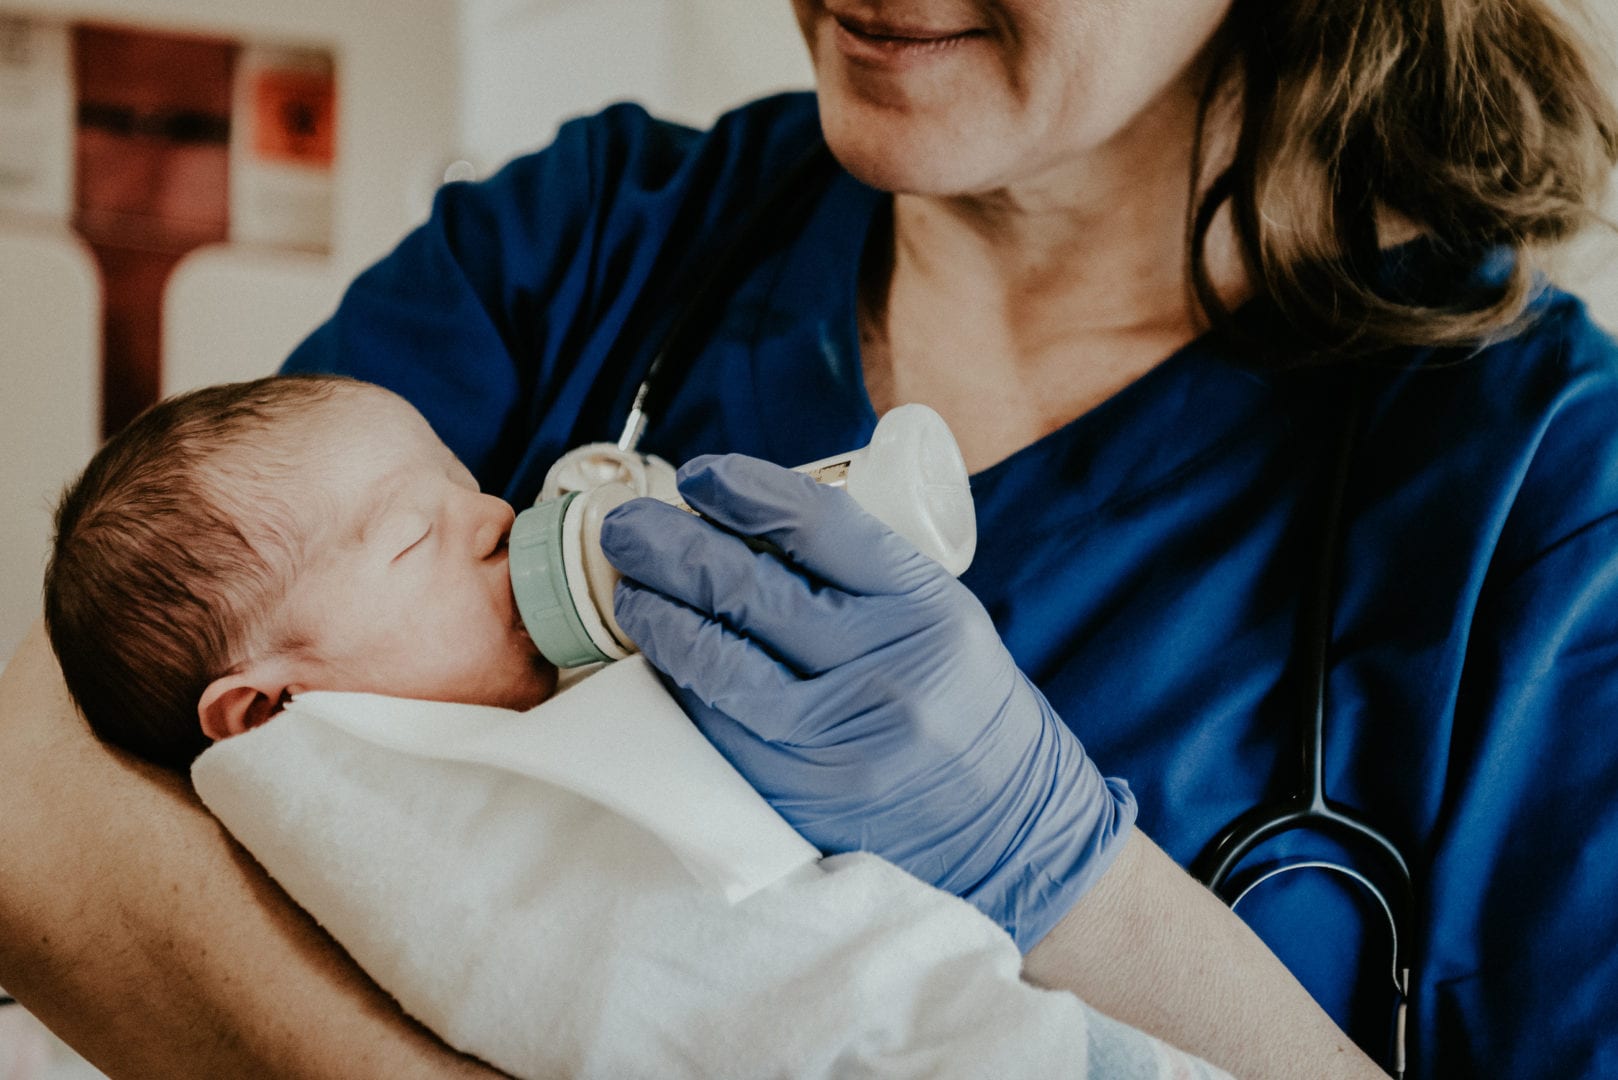 Is NICU Nursing Right for You?